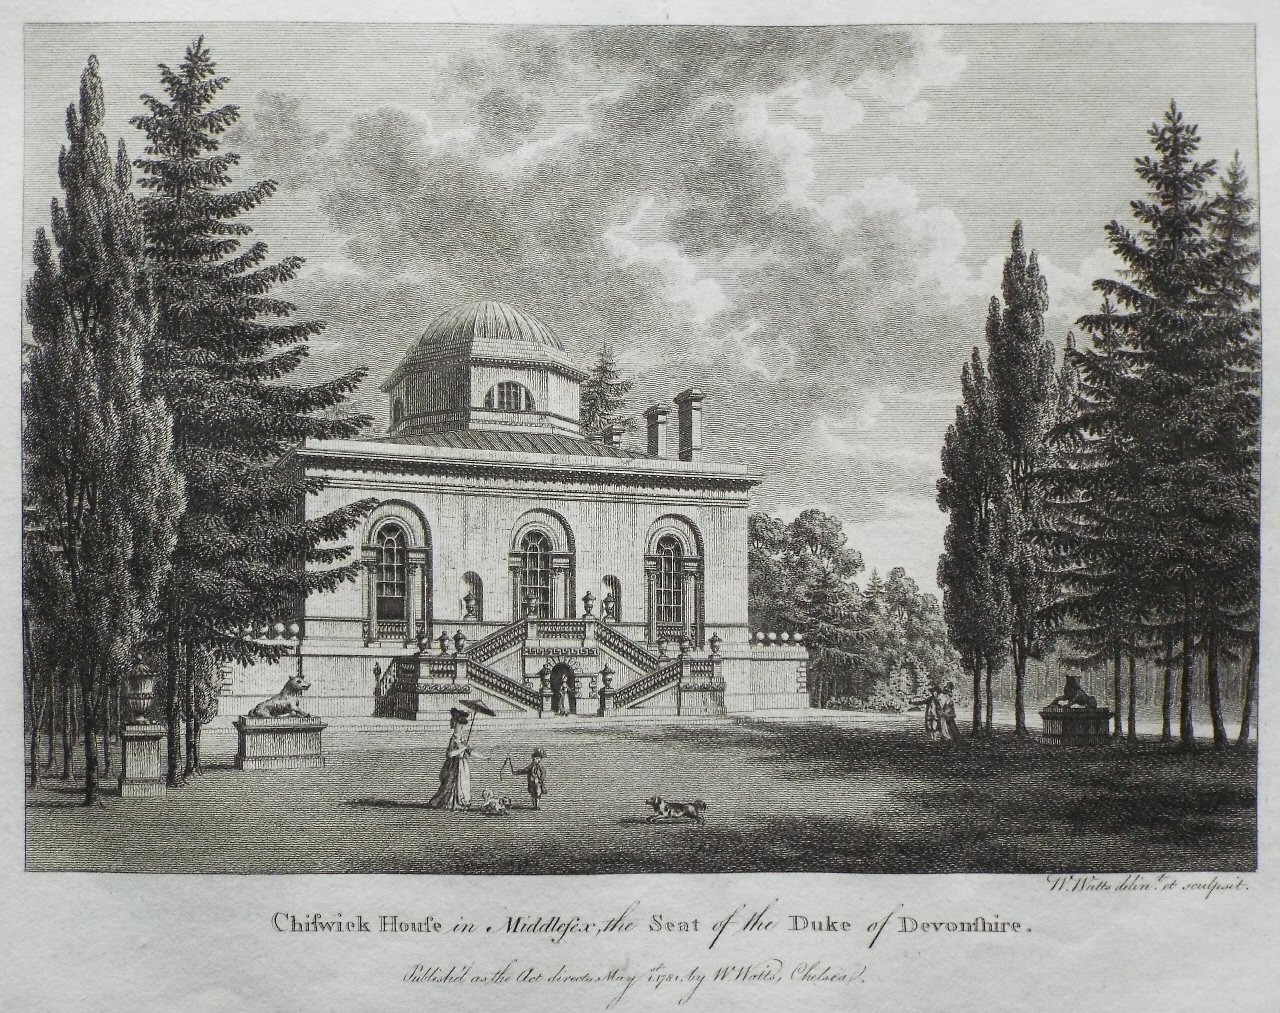 Print - Chiswick House in Middlesex, the Seat of the Duke of Devonshire. - Watts